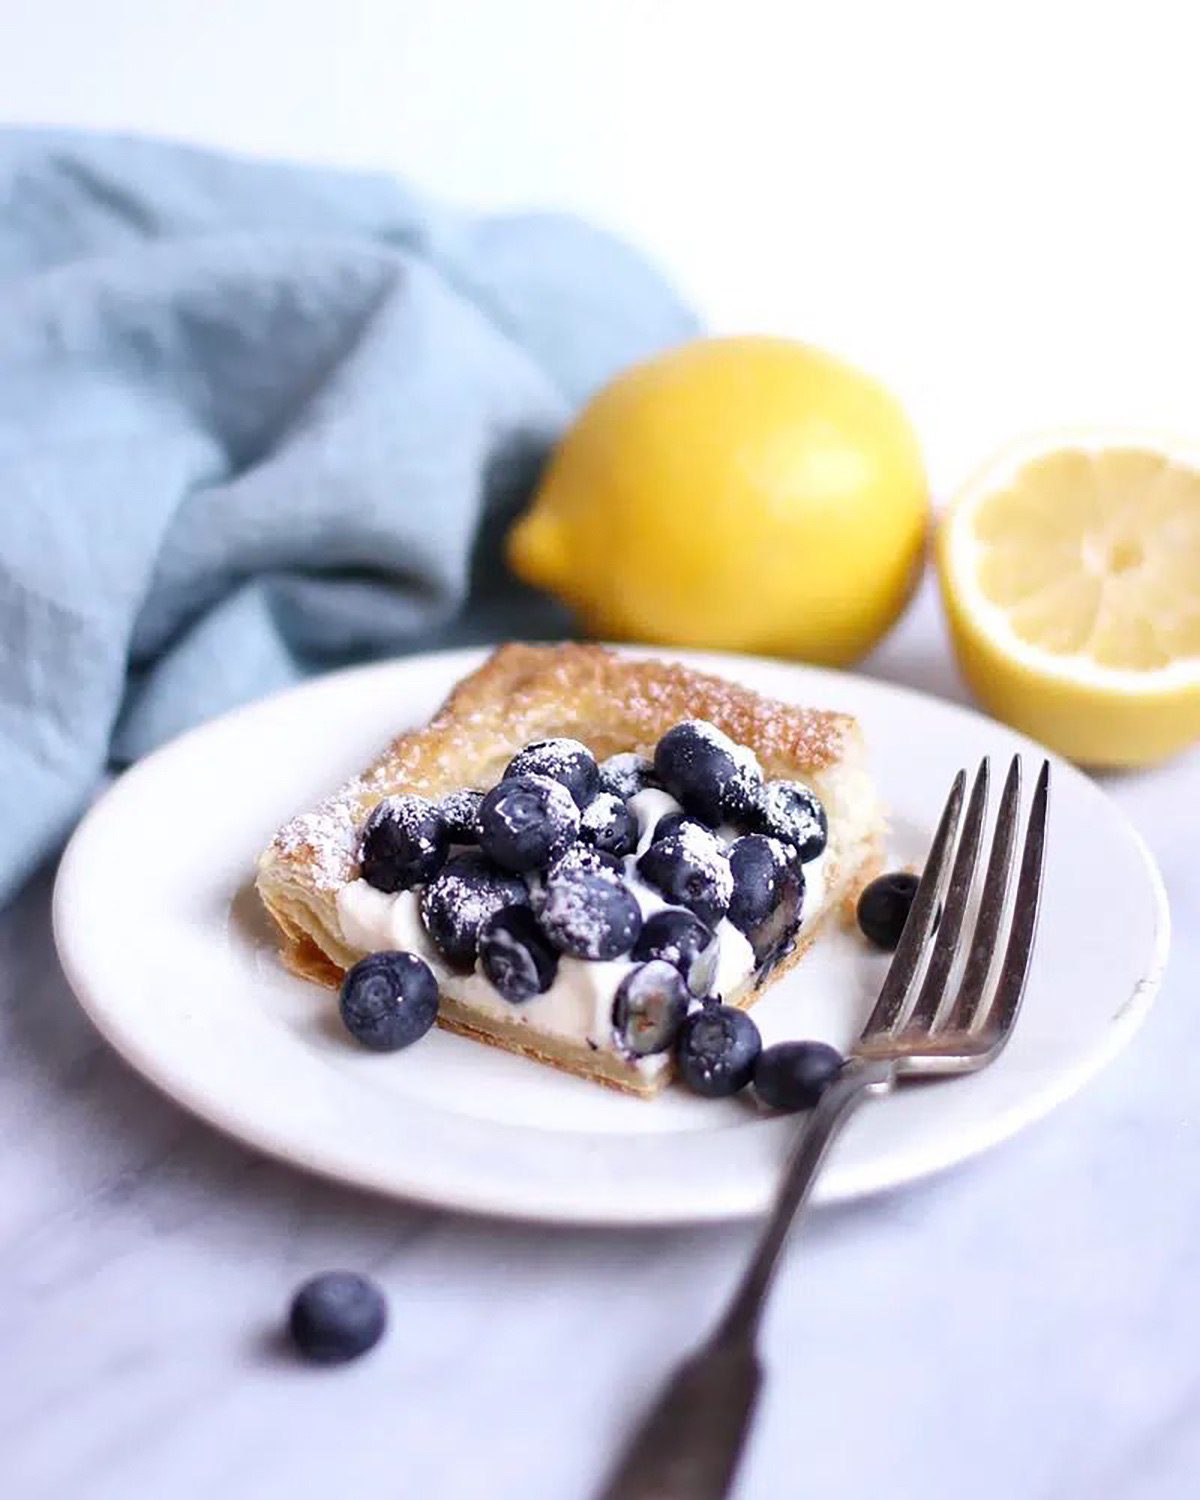 Blueberry Tart with Puff Pastry